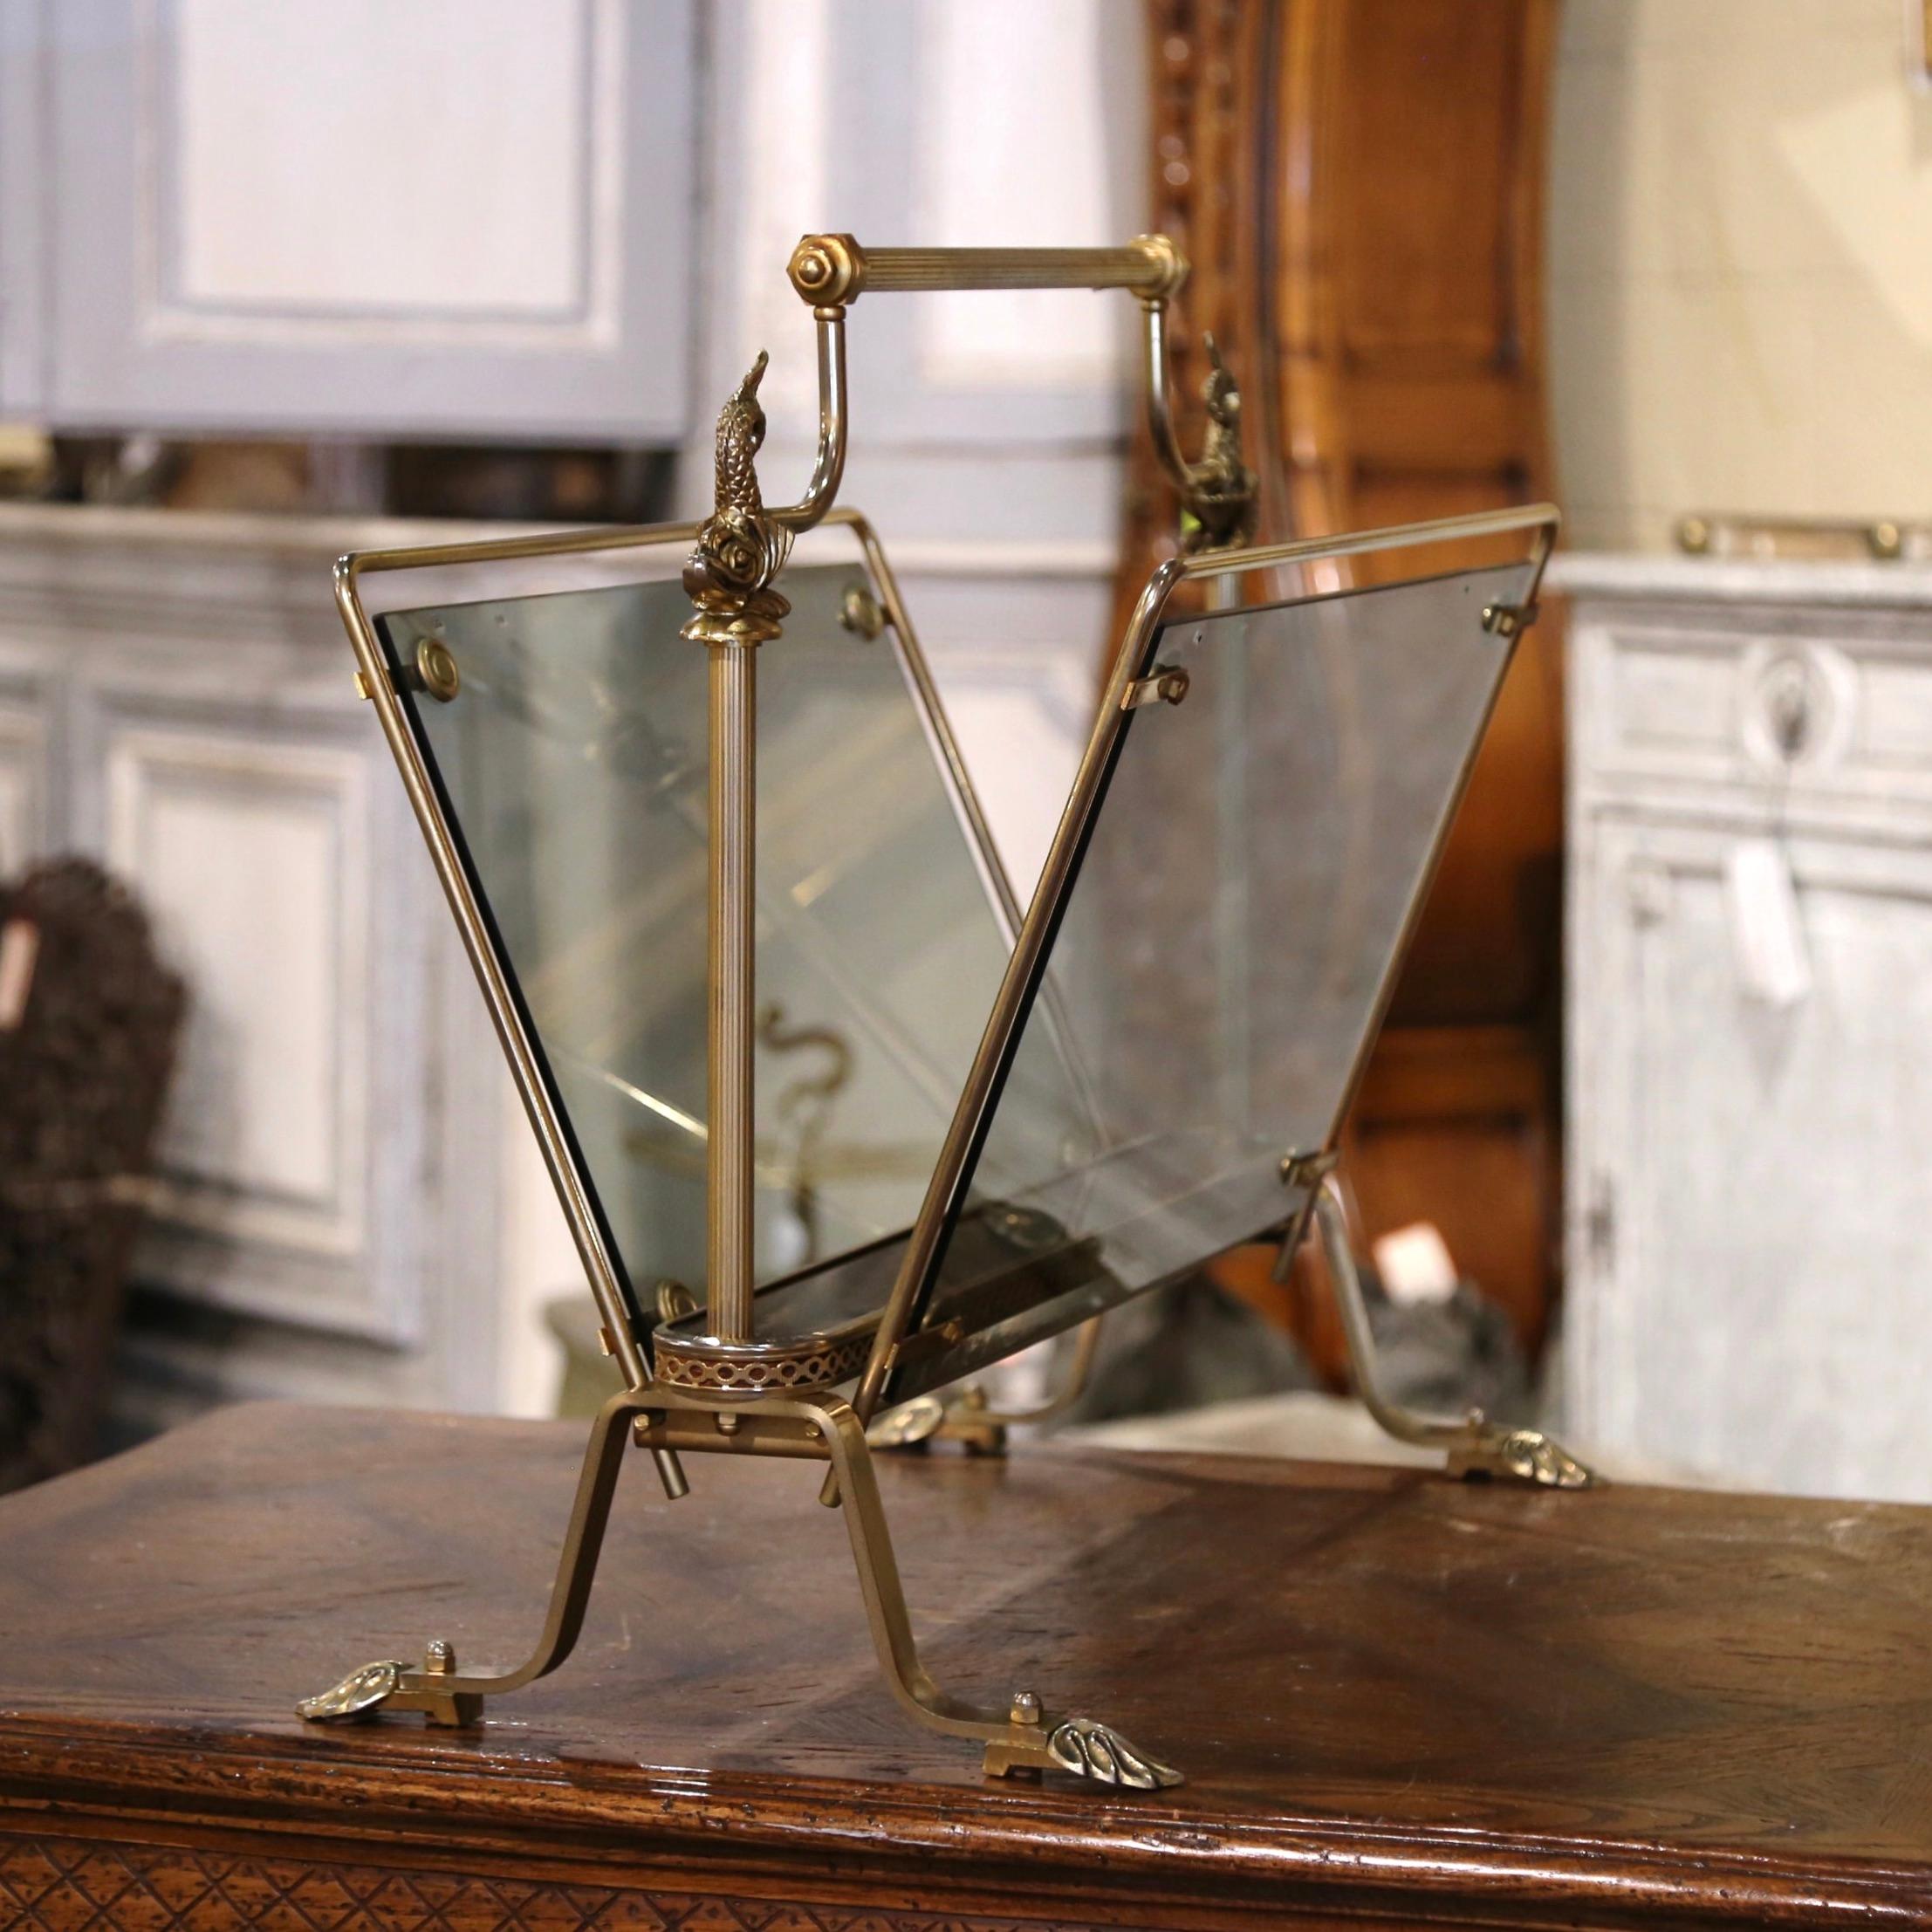 Keep your newspapers organized and neat inside this elegant vintage magazine holder. Crafted in Paris, France circa 1950 and attributed to Maison Jansen, the rack is built of brass and smoked glass. It stands on scrolled feet ending with acanthus